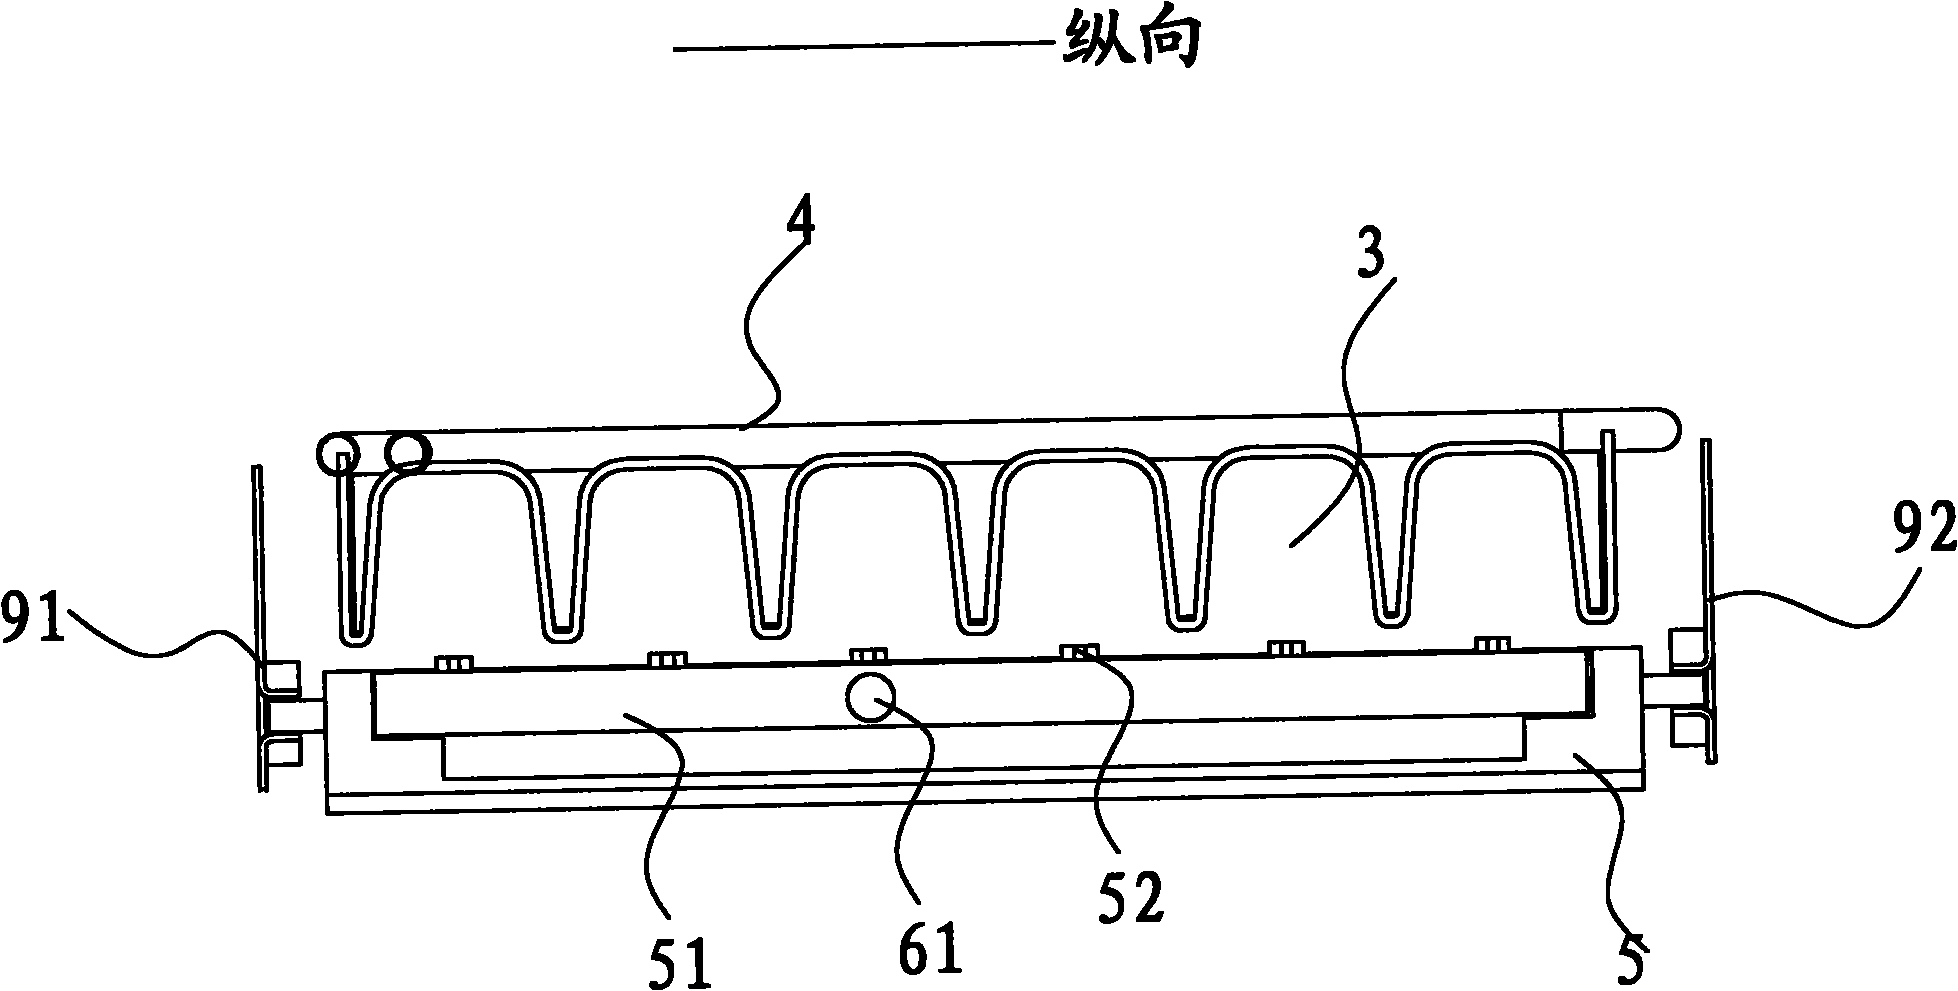 Ice making device for refrigerator and refrigerator with same